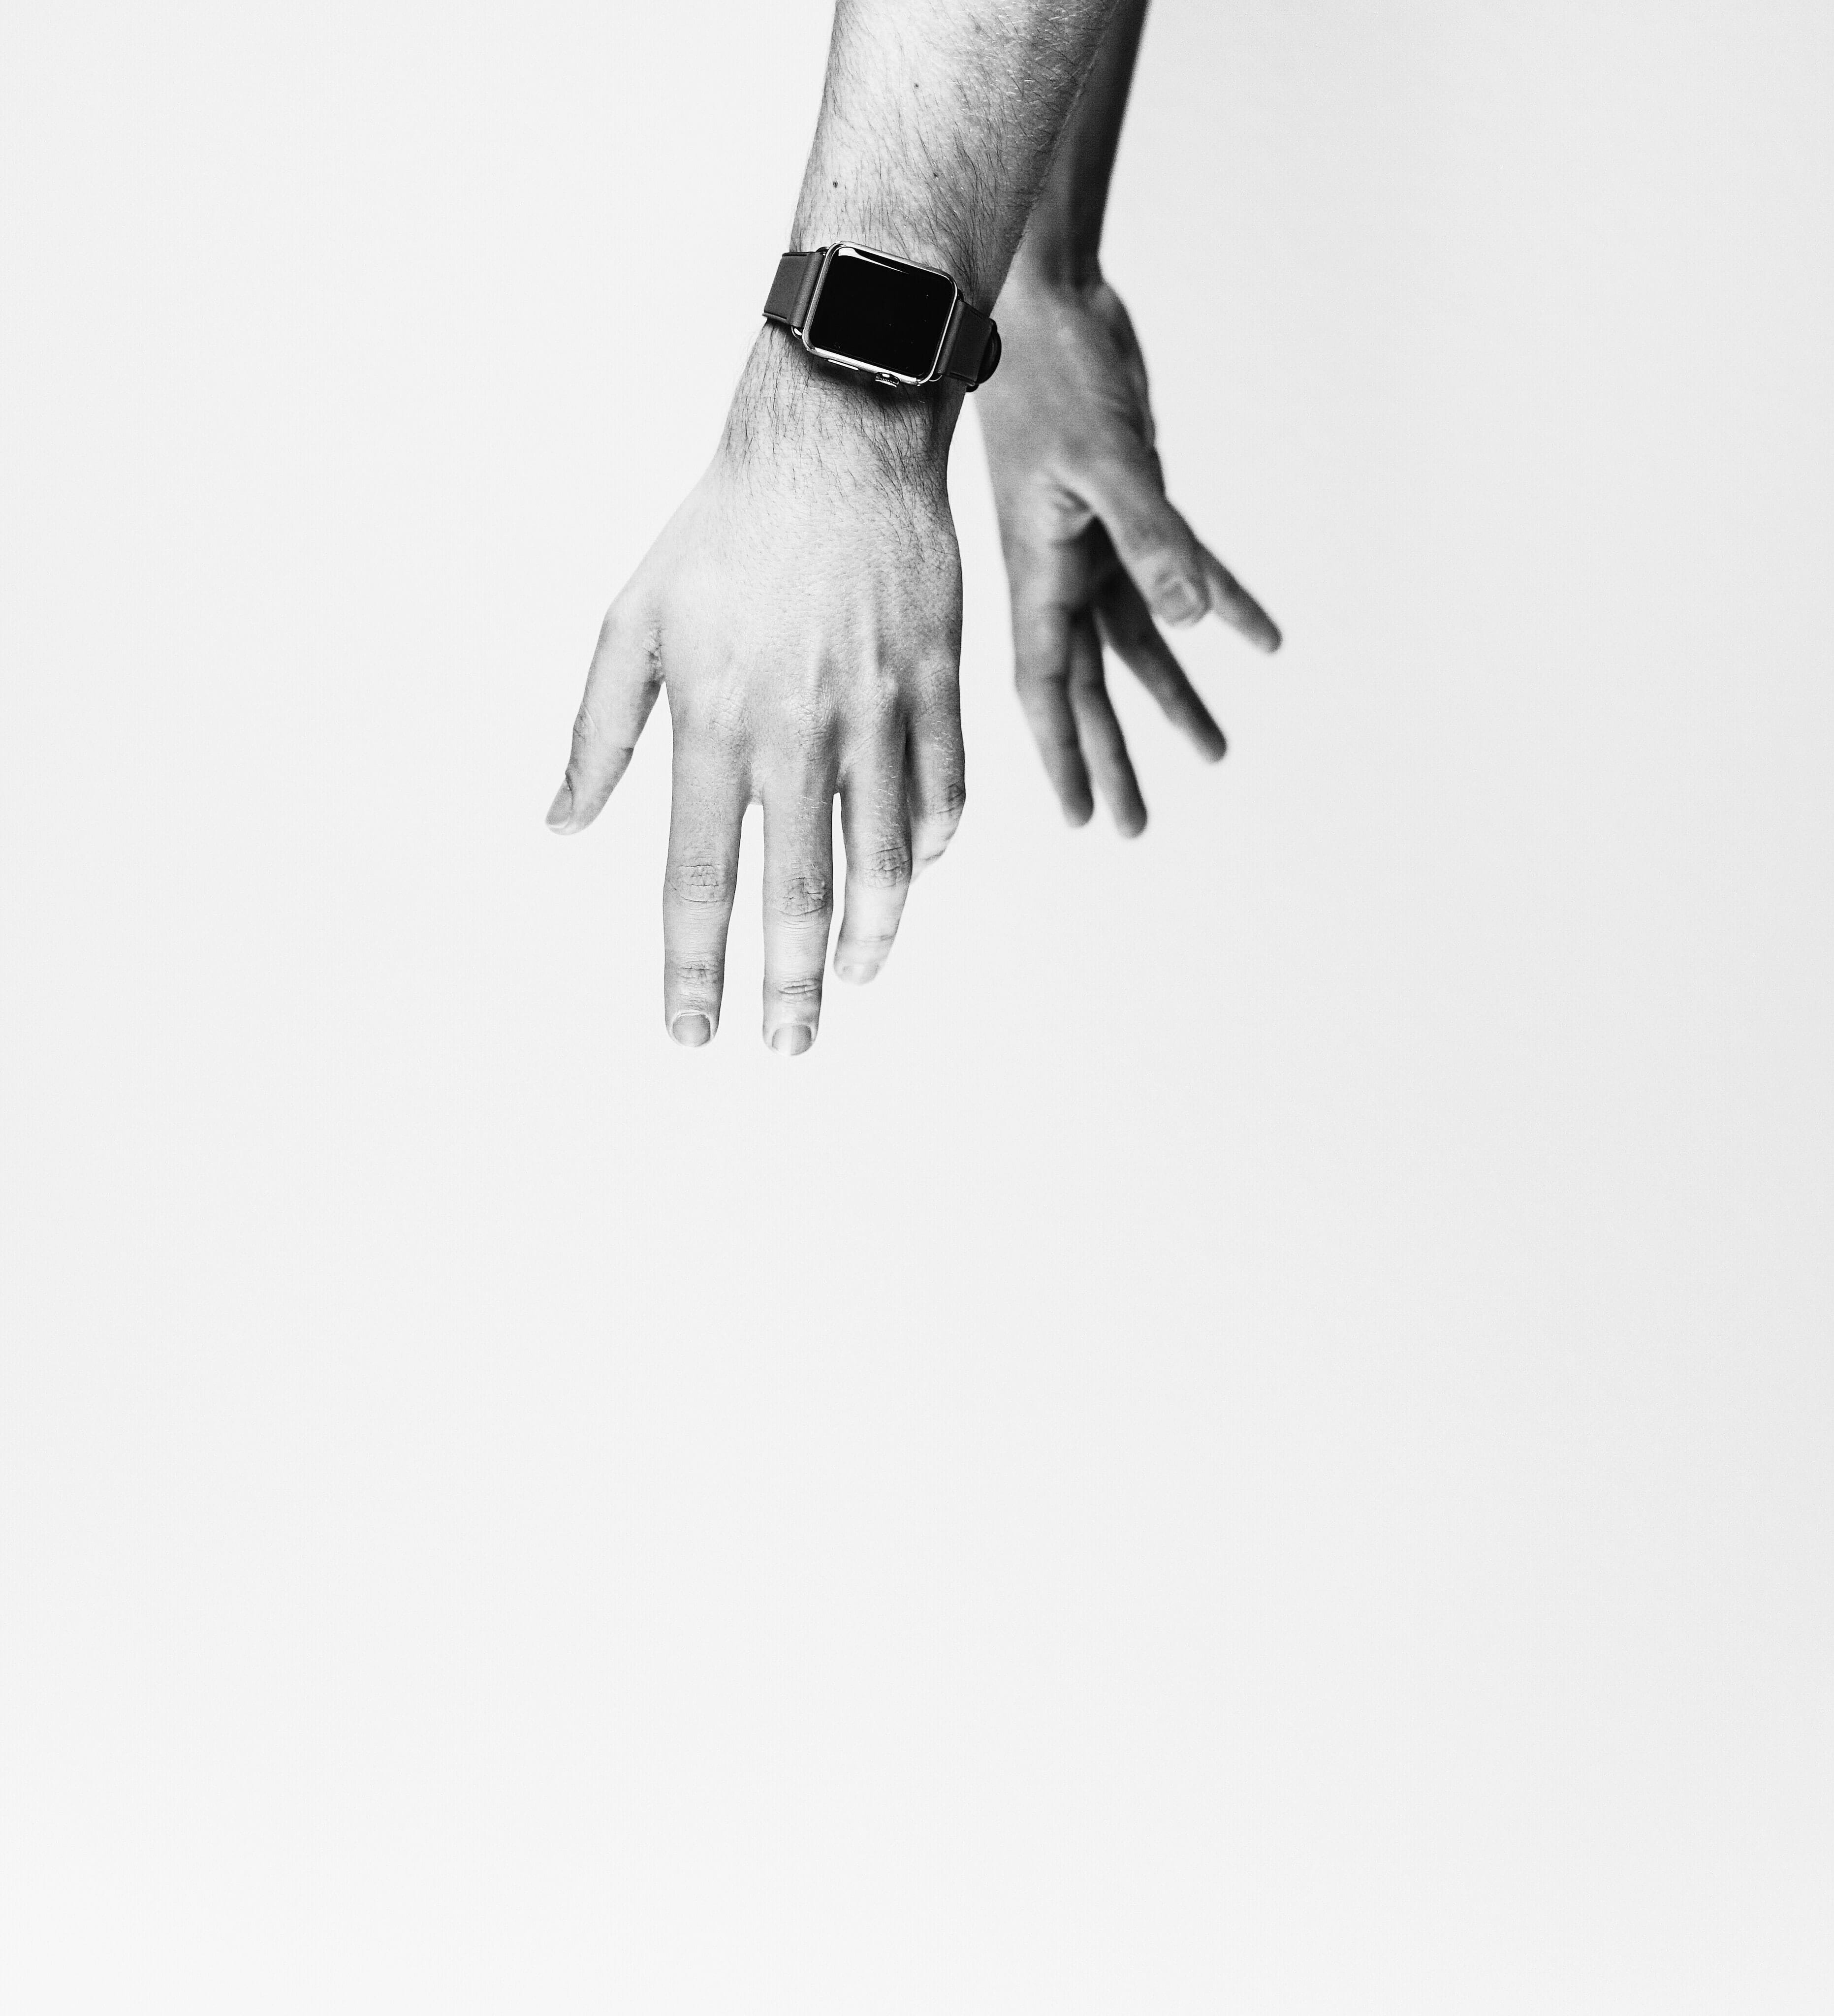 Two hands reaching down toward the bottom of the frame against a light gray background in black and white.